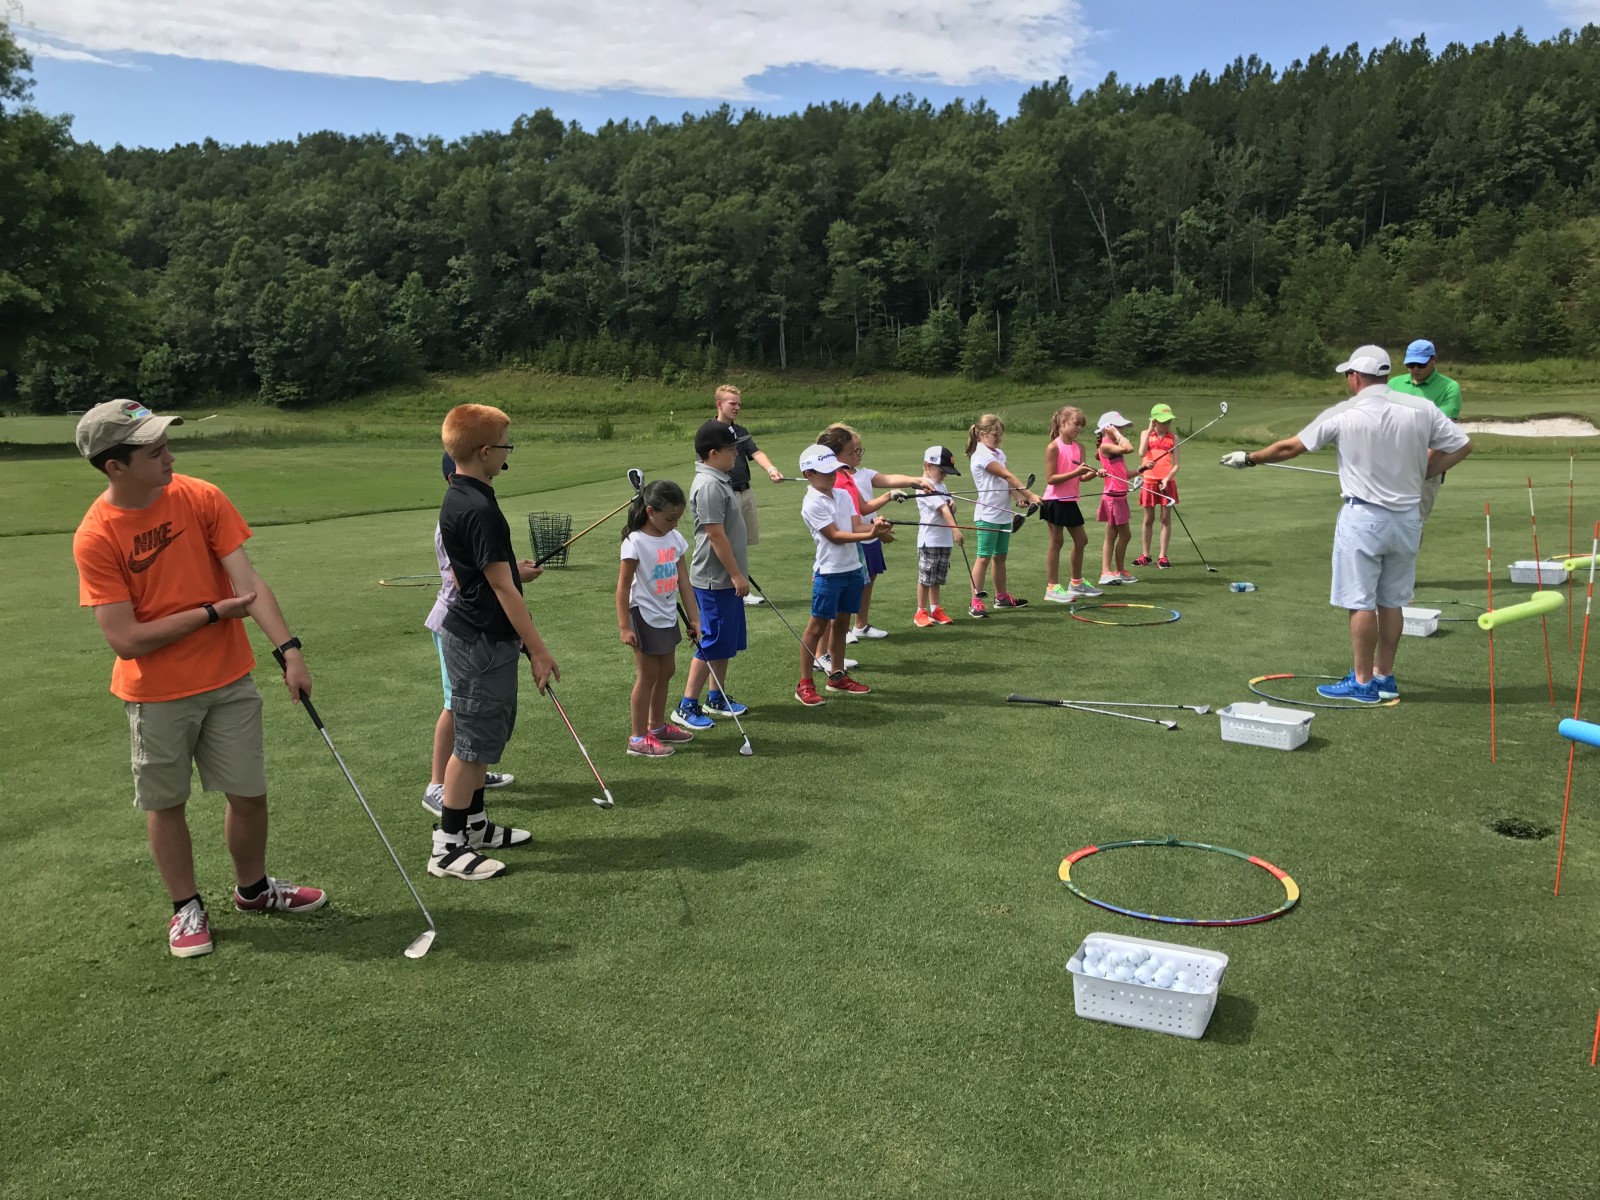 Golf lessons for kids at Bright's Creek Golf Club in Blue Ridge Mountains